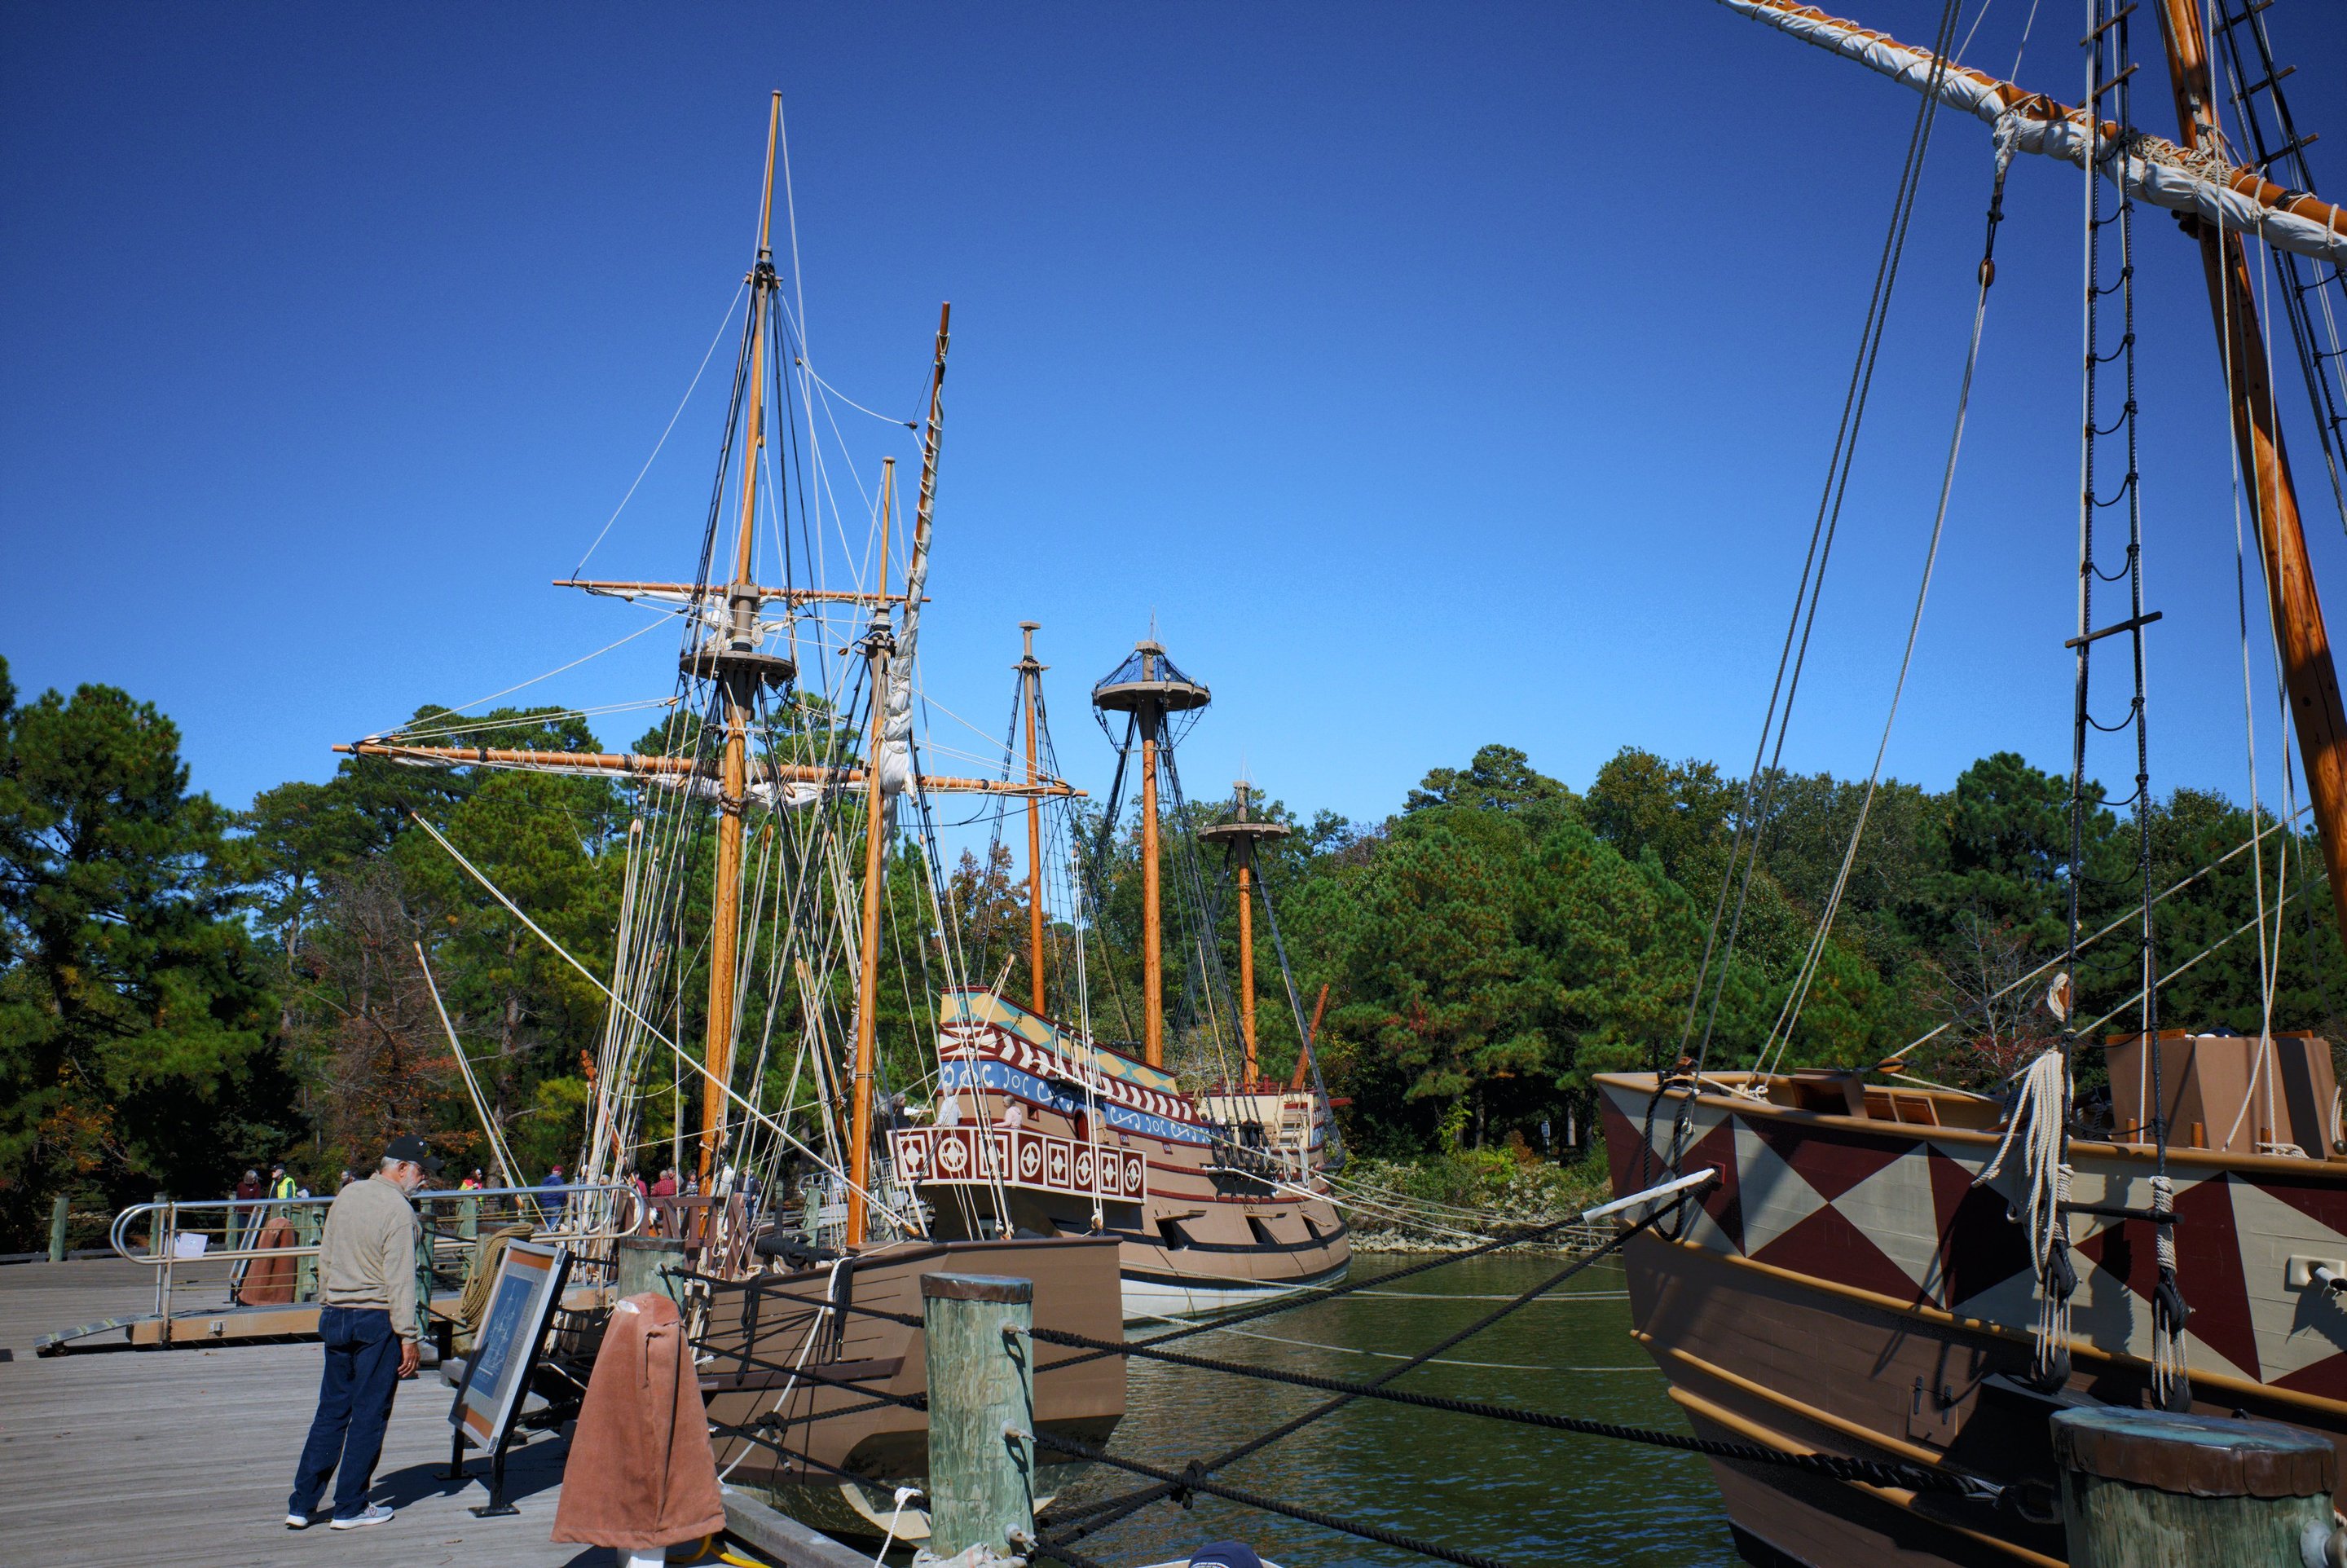 replicas of the ships that sailed to Jamestown photographed by luxagraf